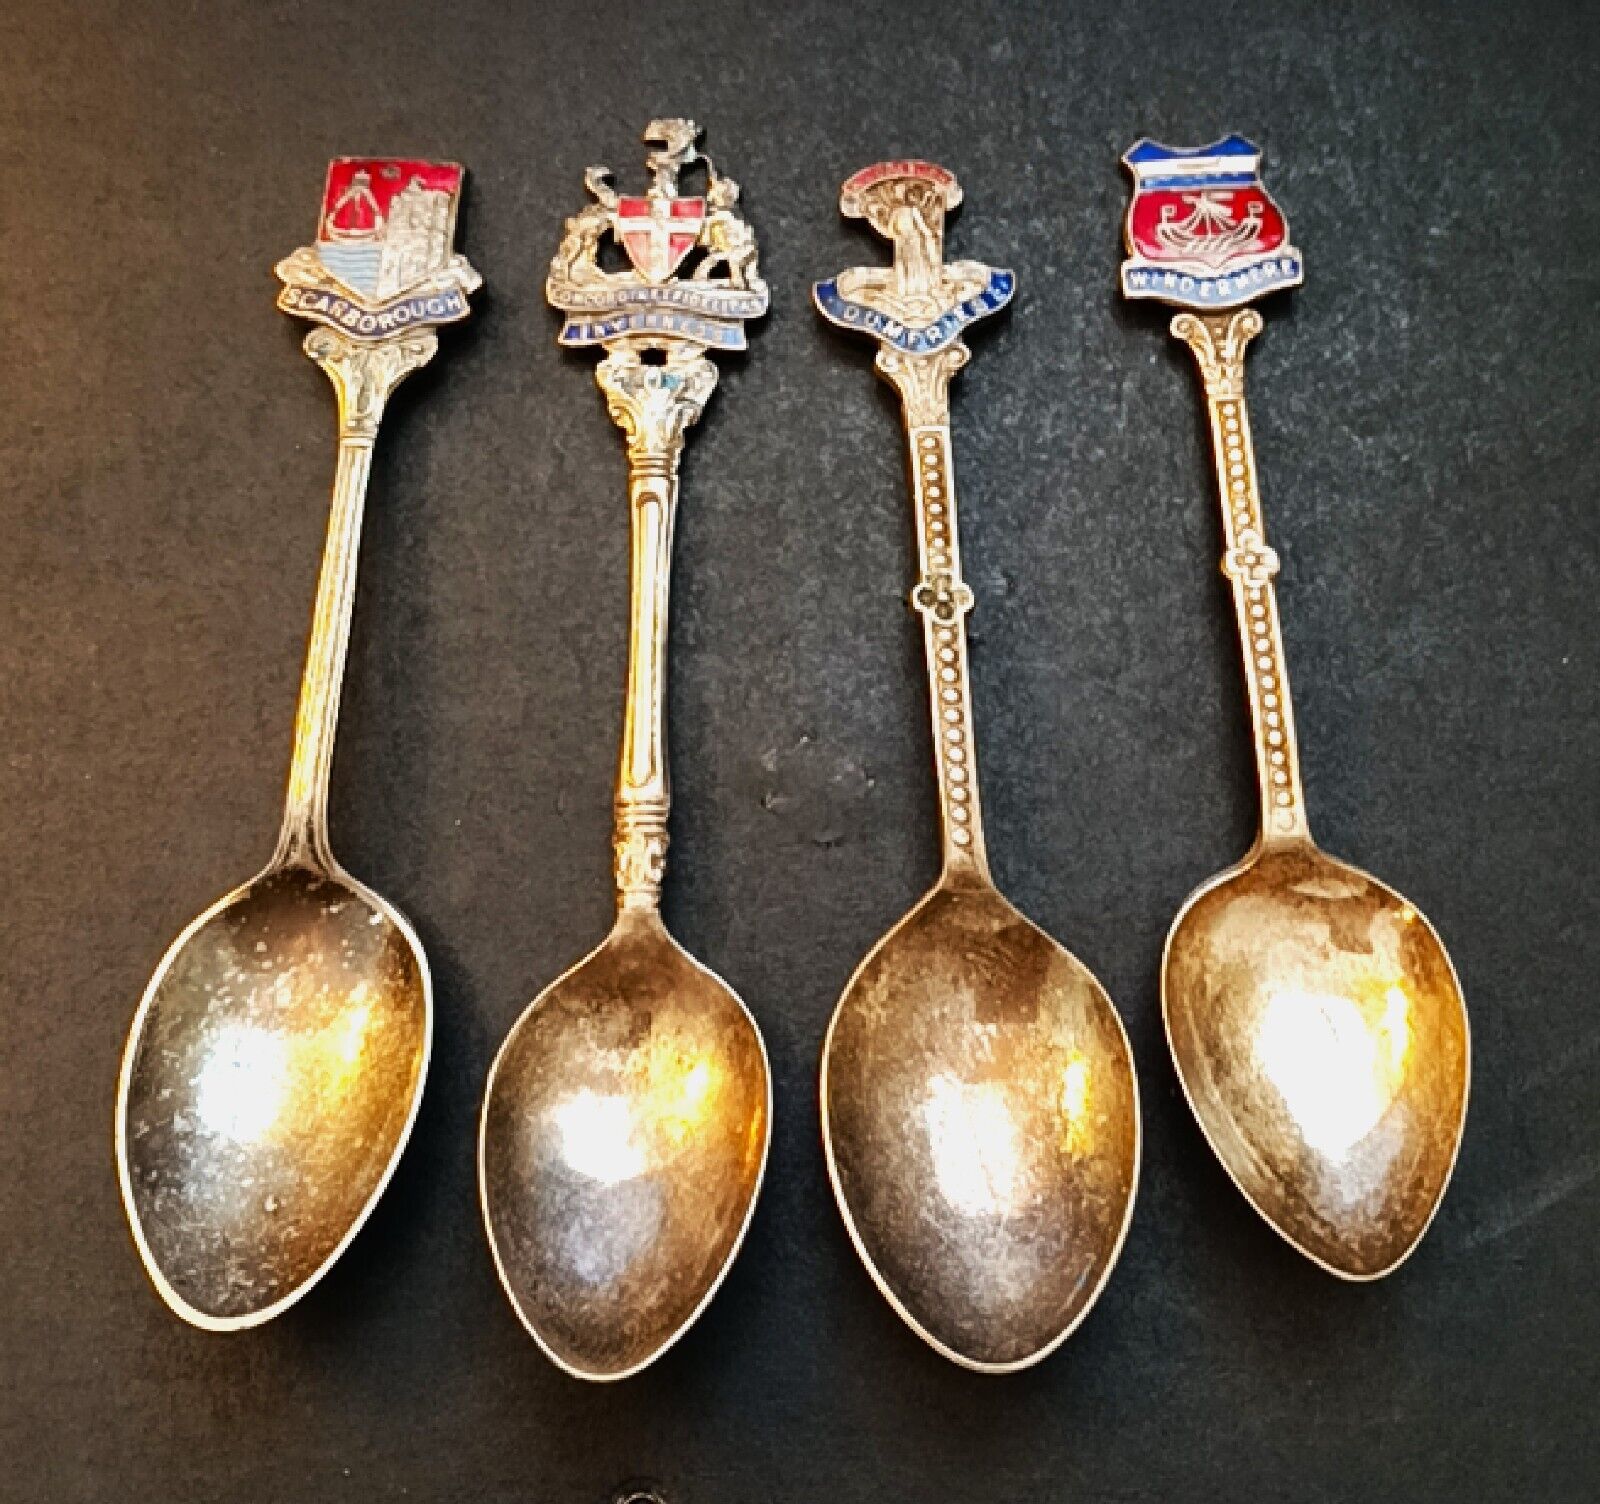 4 Vintage Silverplate Scotland Town Shield Collector Spoons